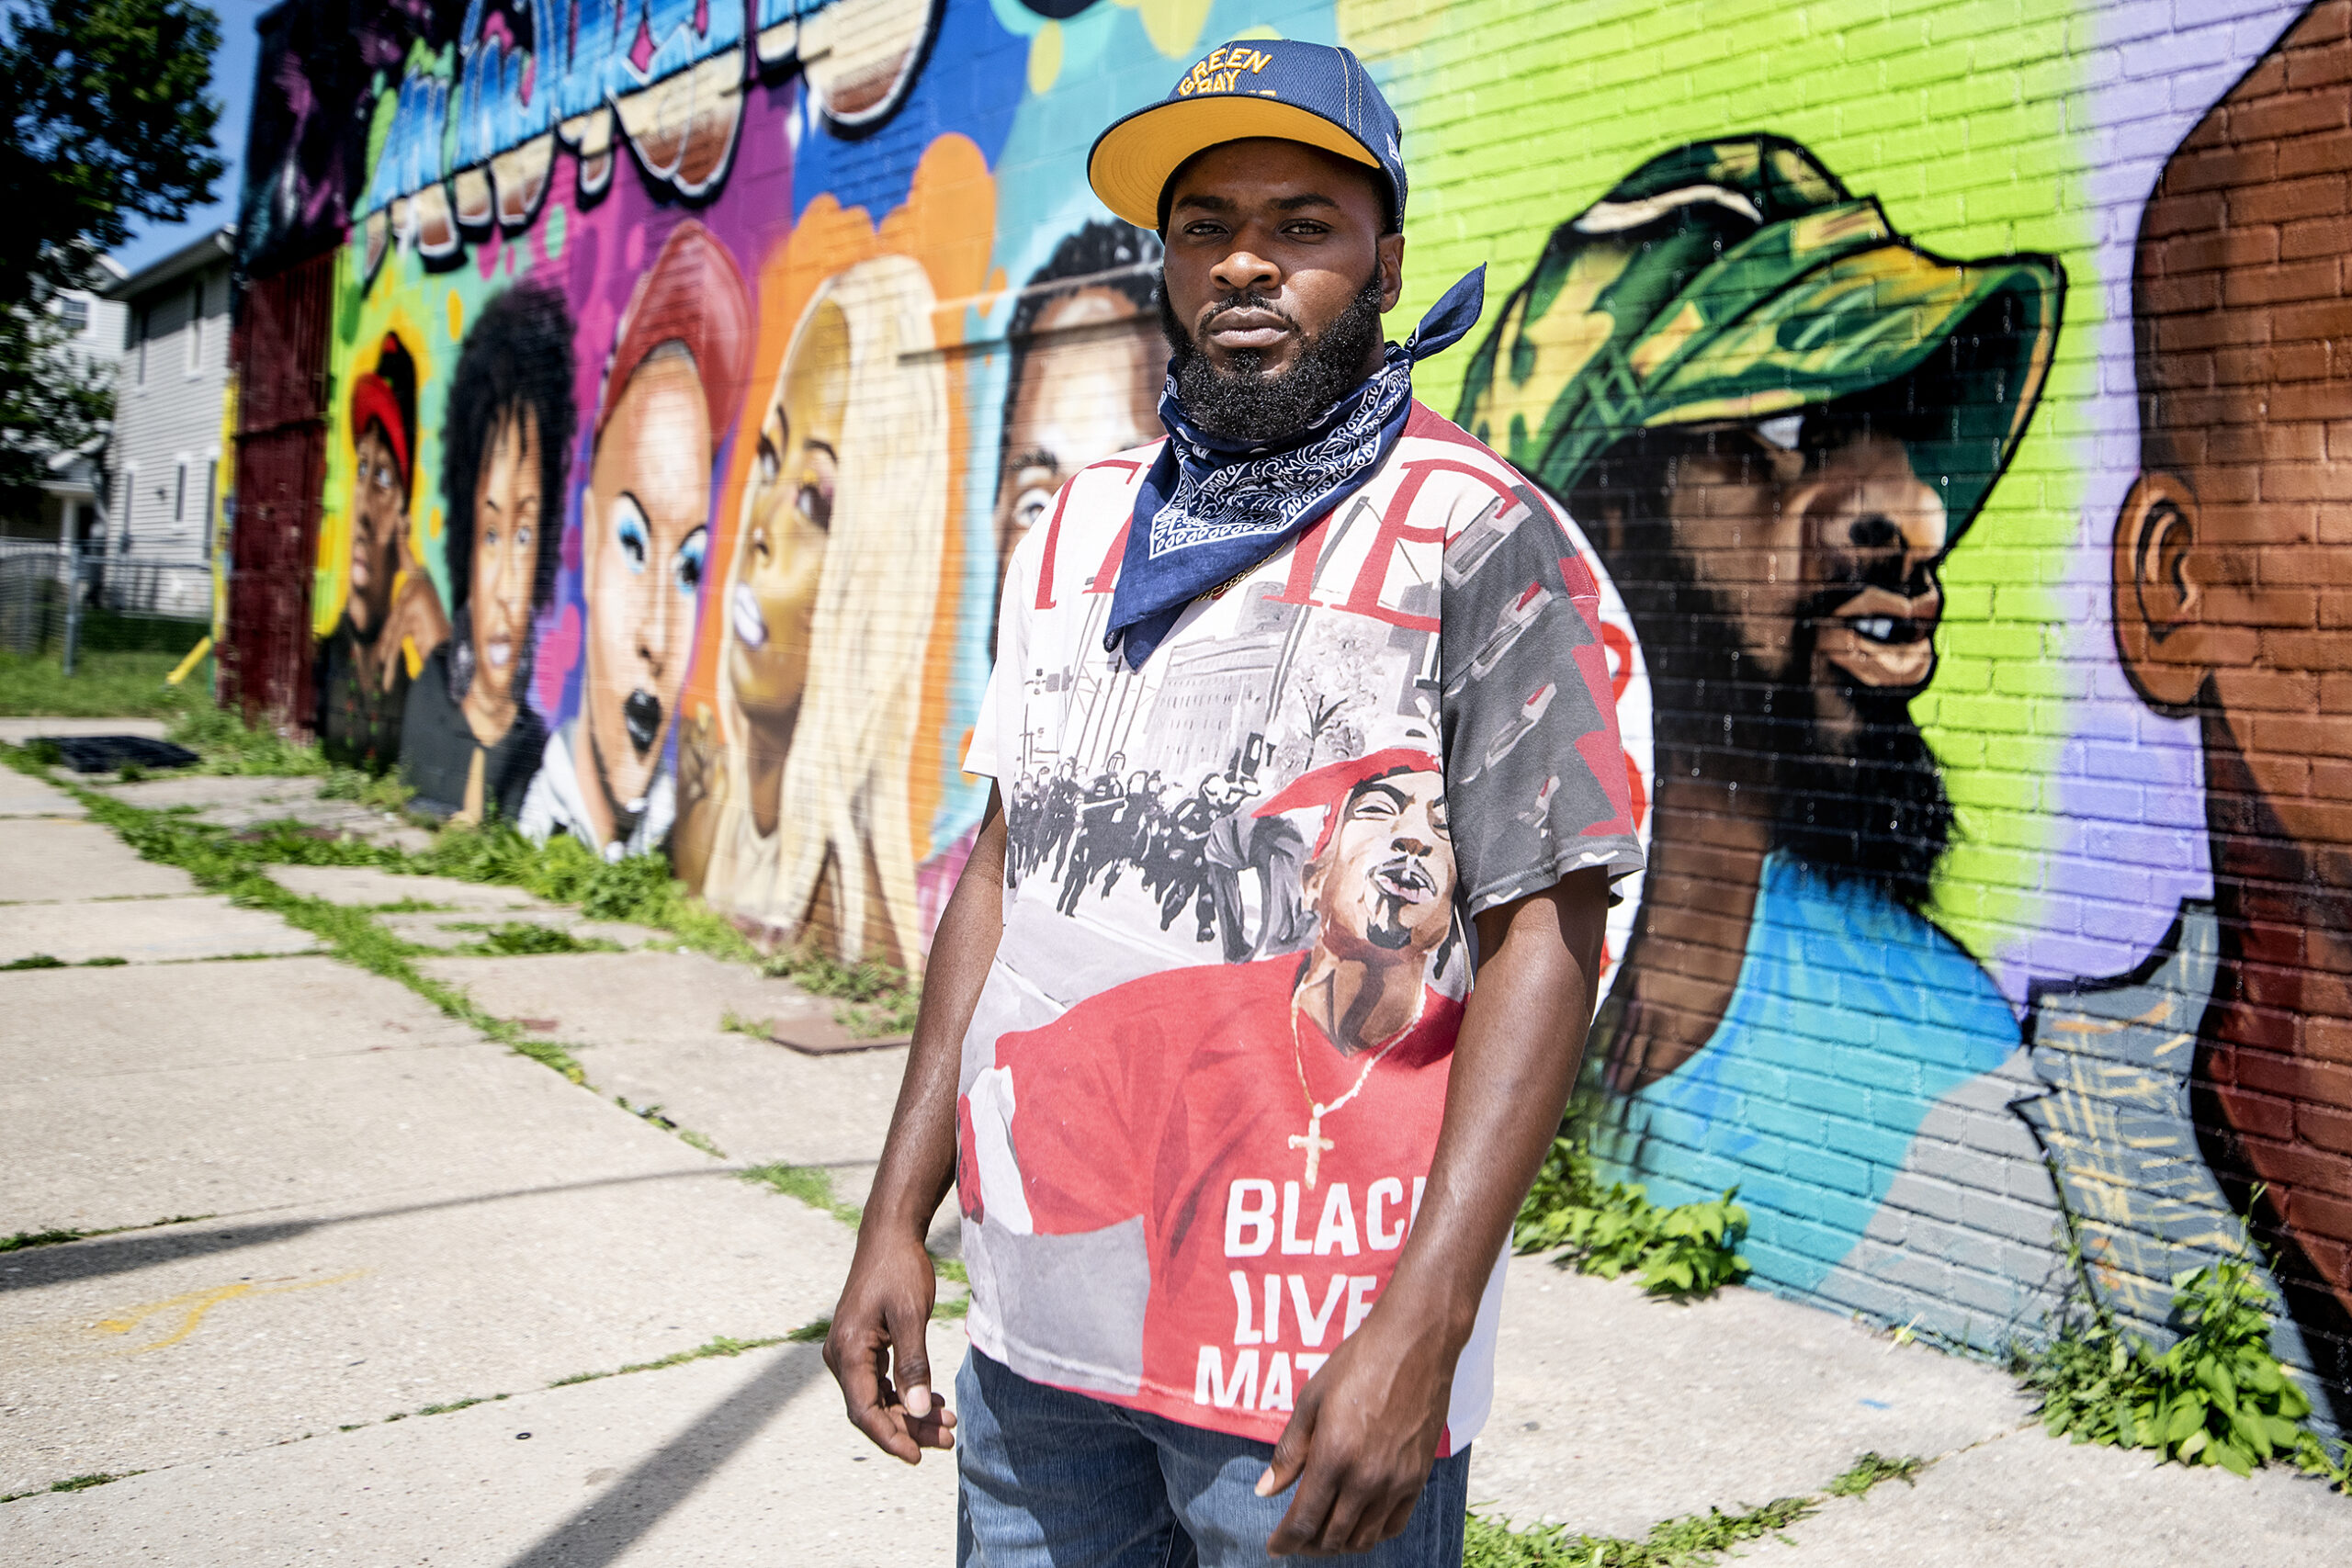 A man stands in front of a colorful mural showing the faces of people involved in the black lives matter movement